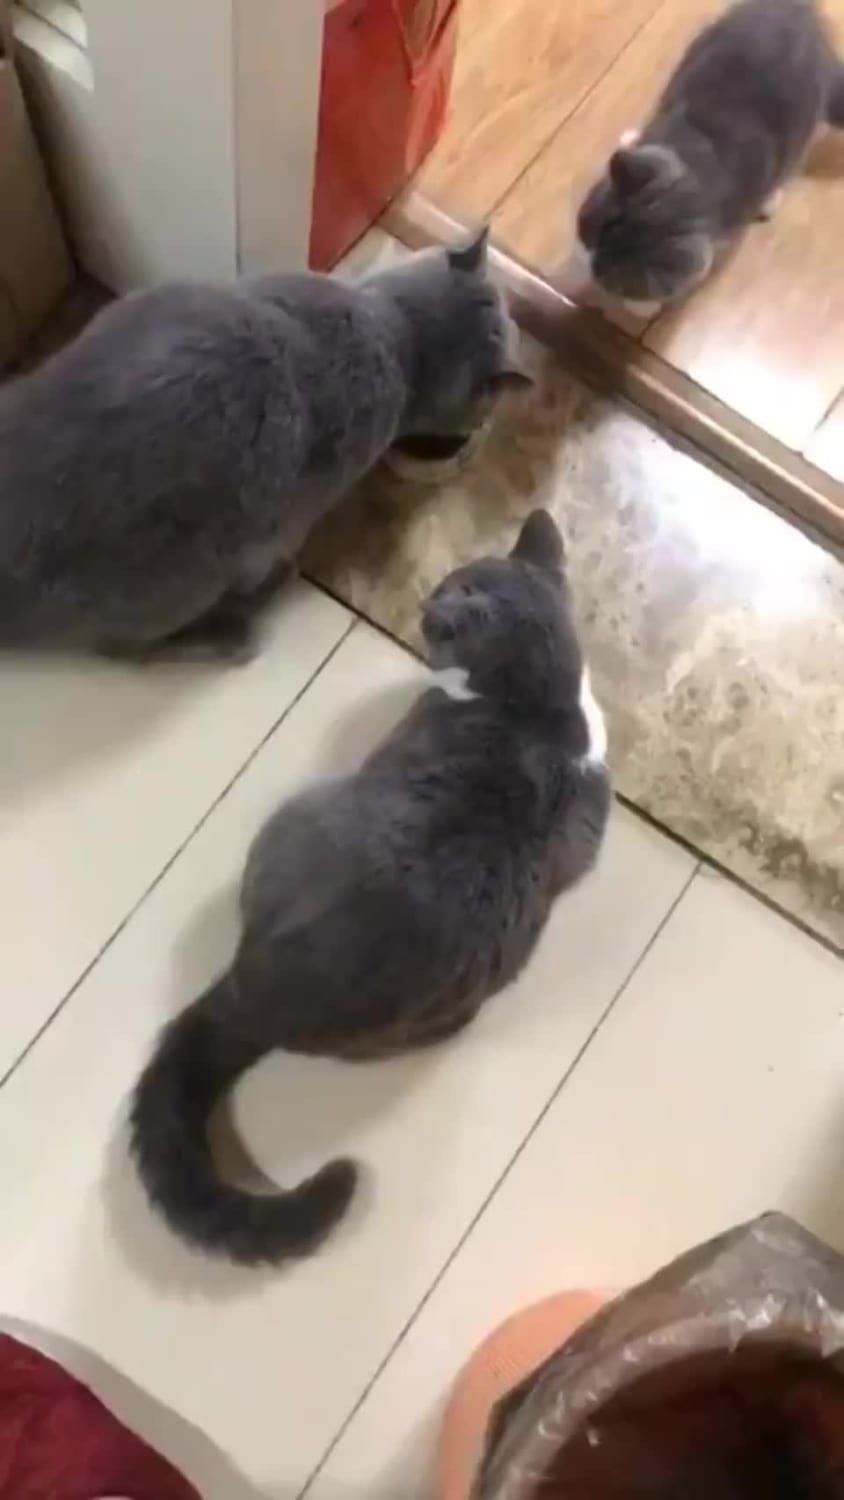 Hit cat uses her powers to parent.